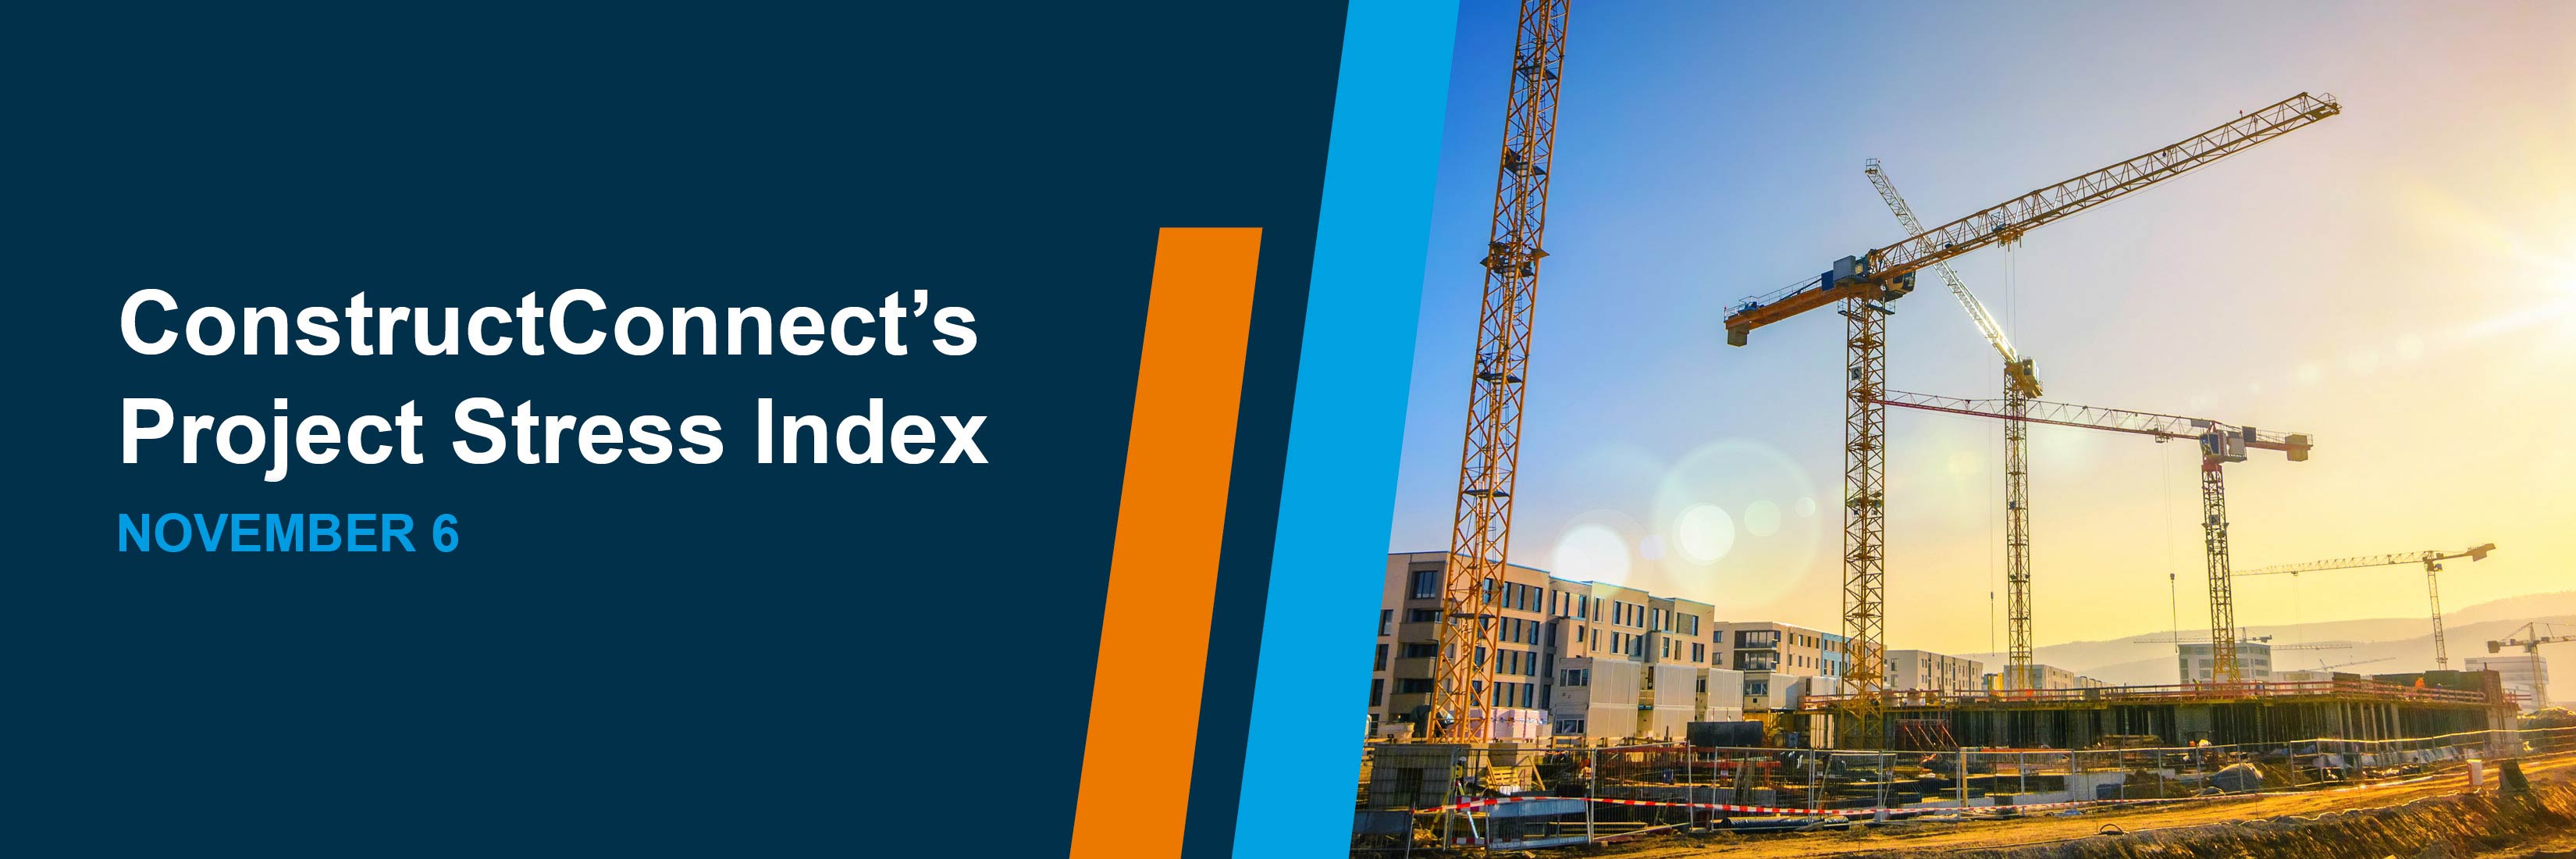 ConstructConnect's Project Stress Index - November 6